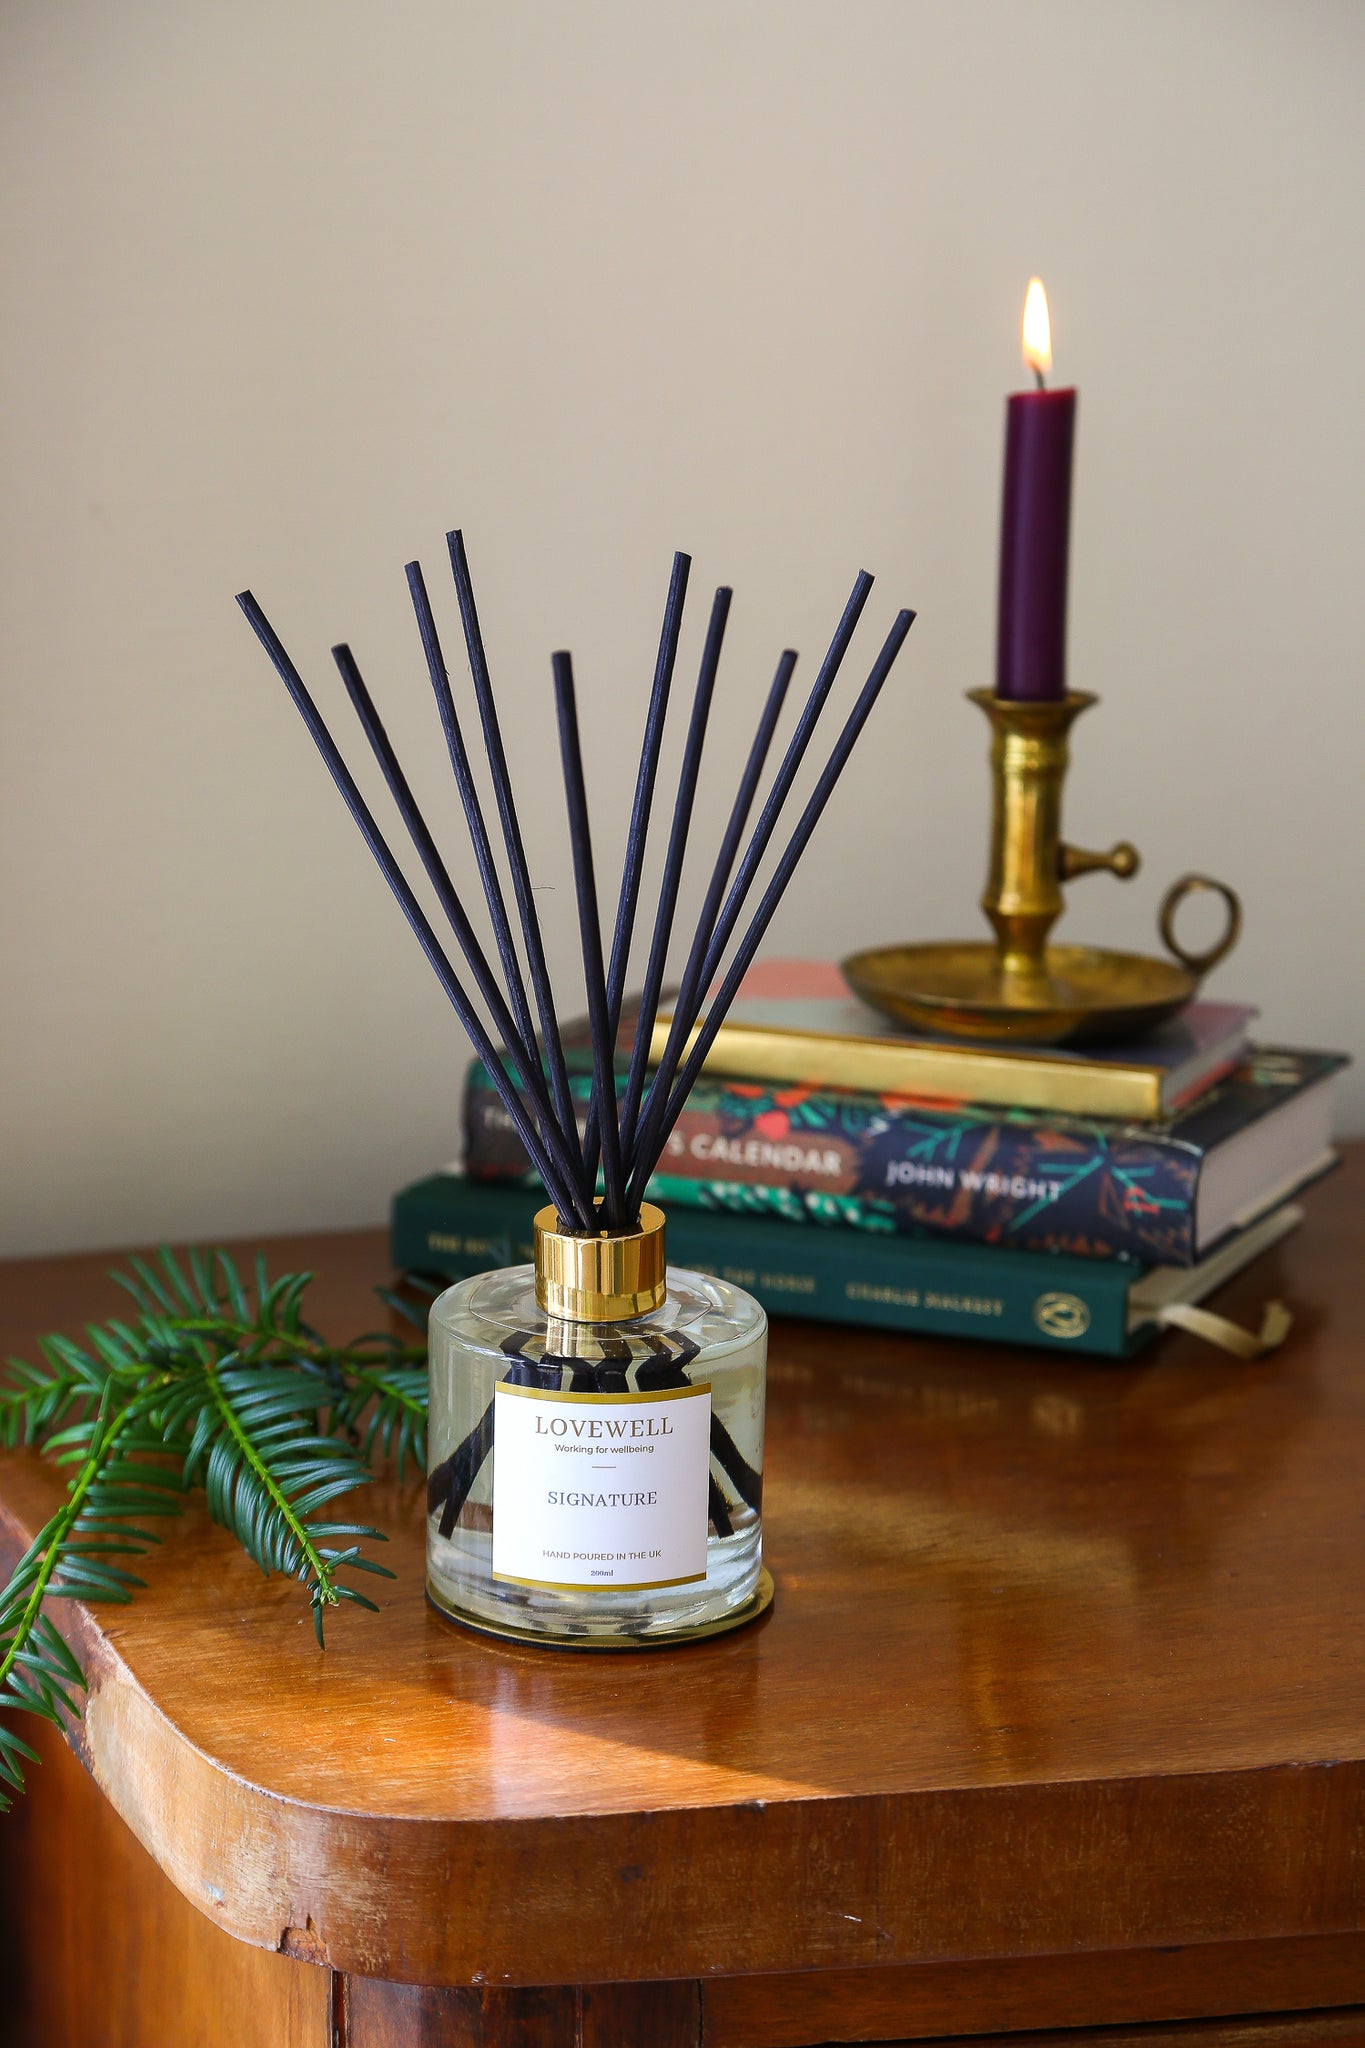 Fresh Linen Reed Diffusers